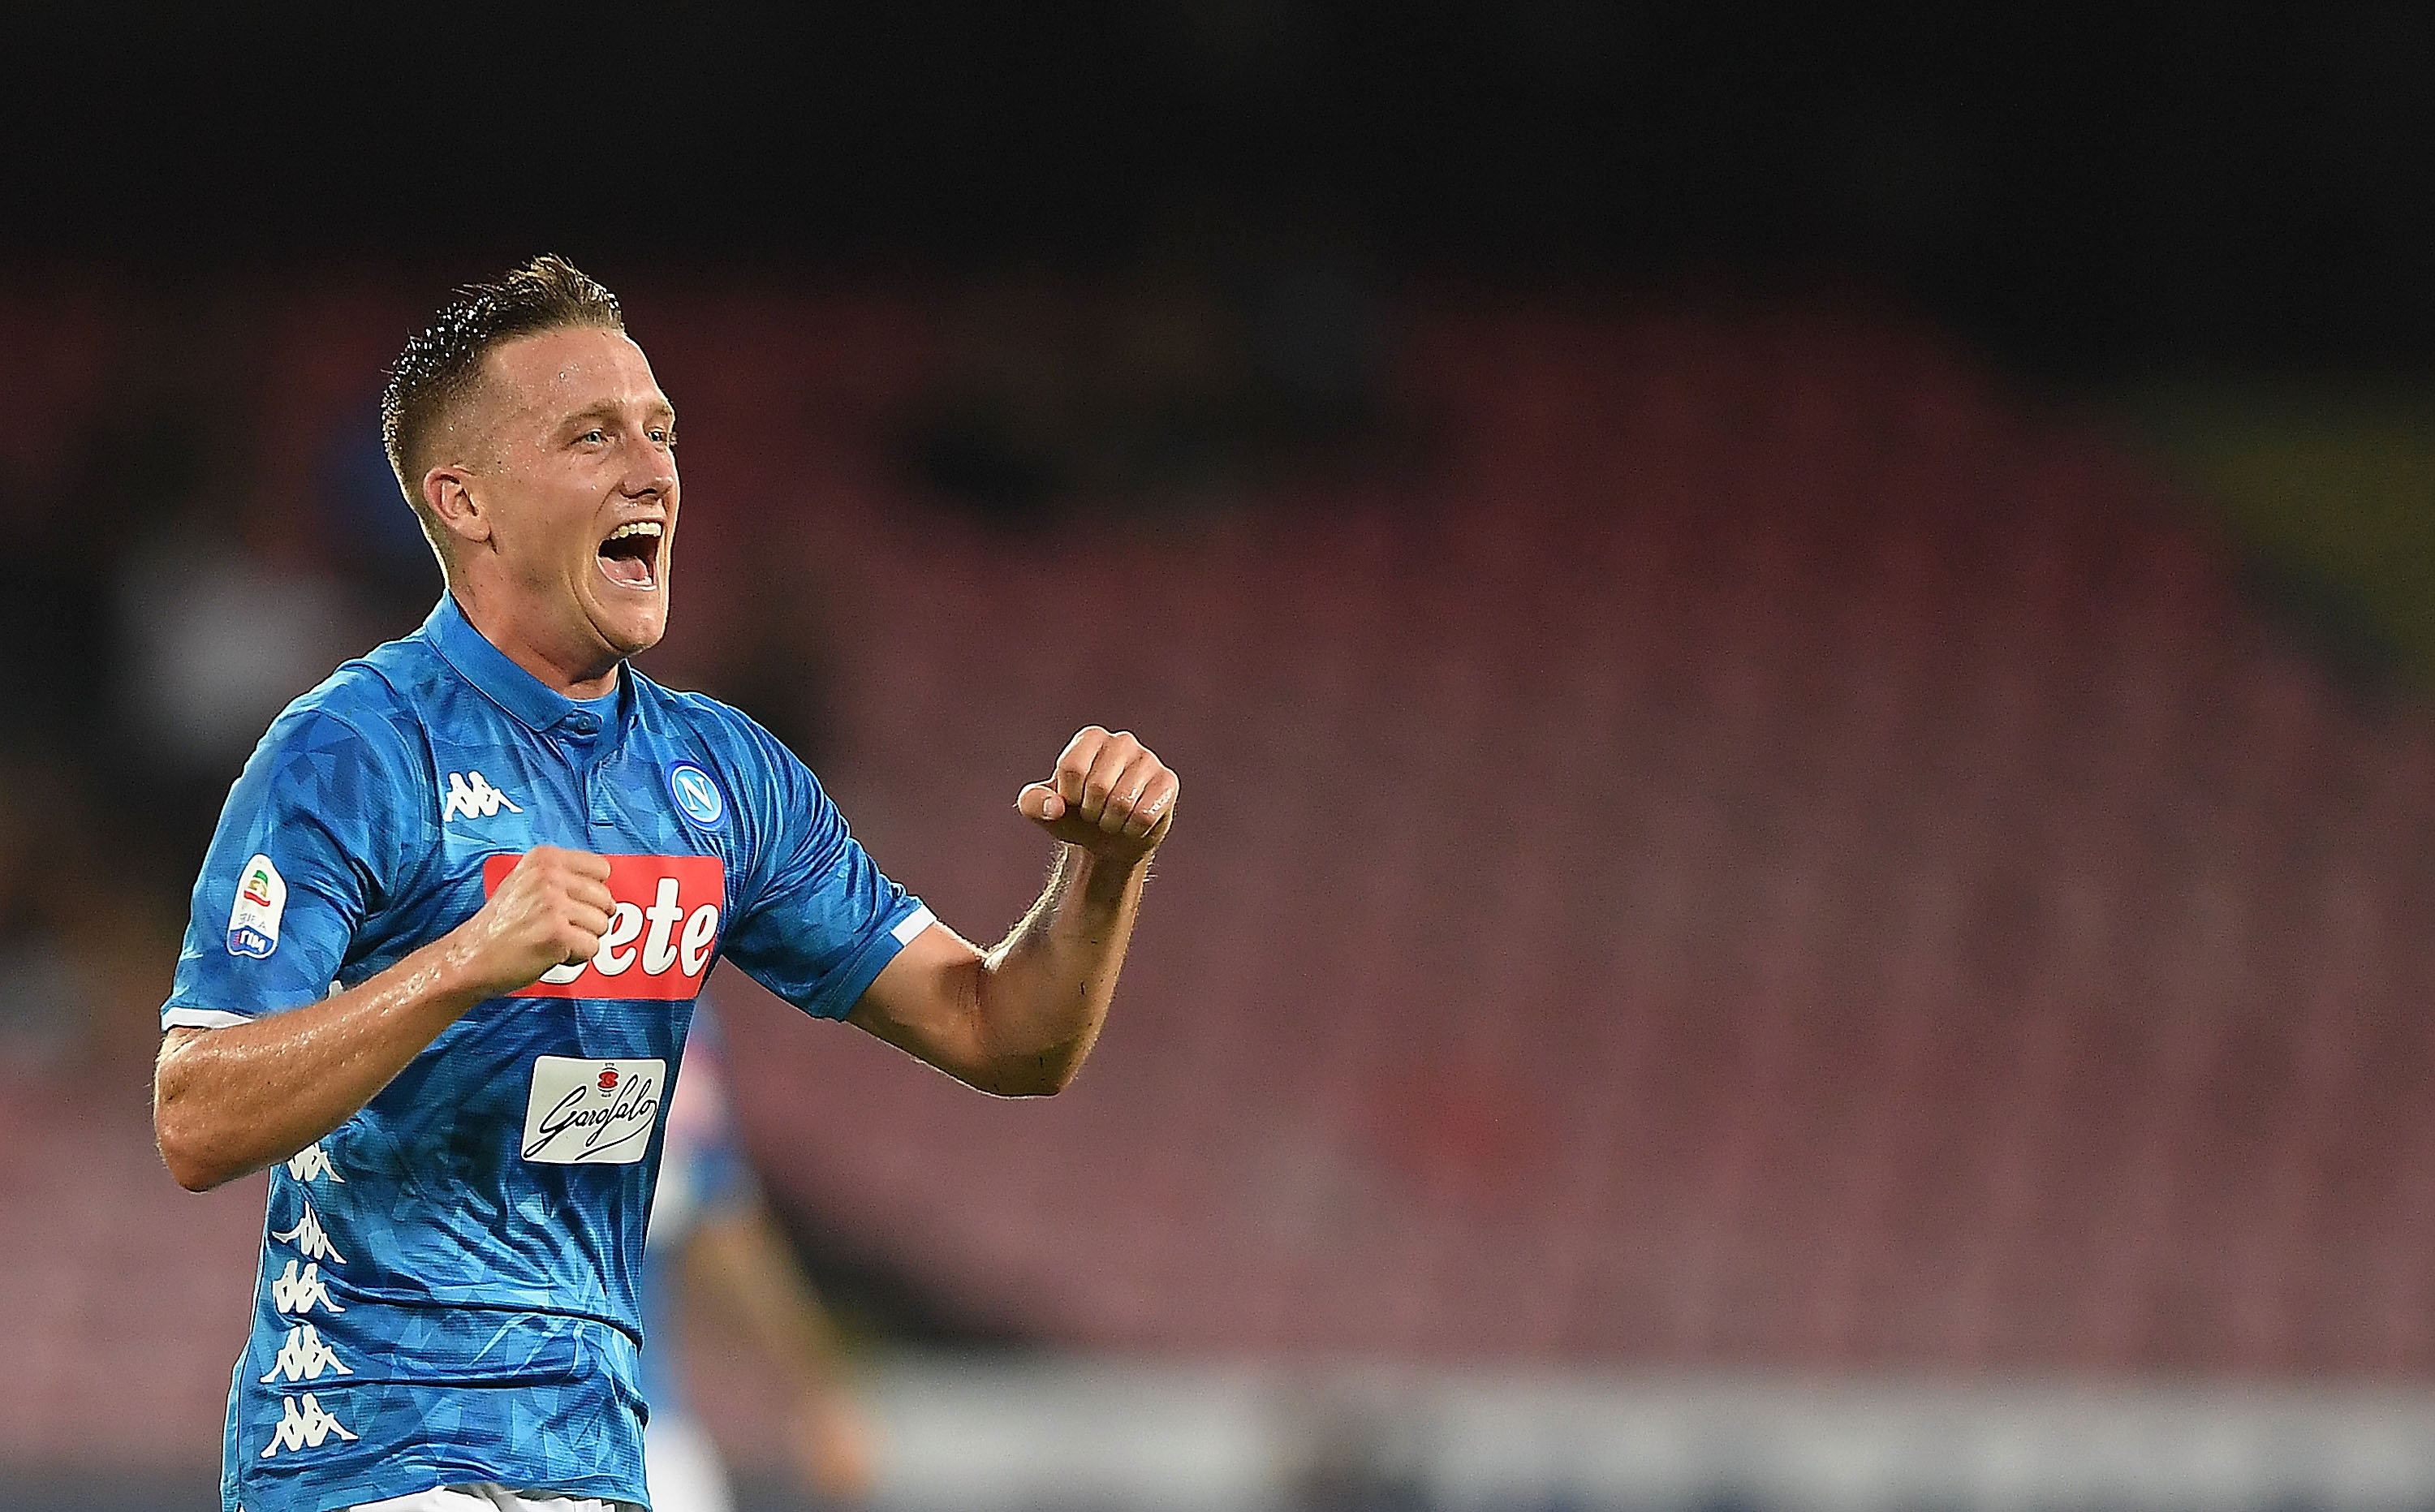 NAPLES, ITALY - AUGUST 25:  Piotr Zielinski of SSC Napoli celebrates after scoring the 2-2 goal during the serie A match between SSC Napoli and AC Milan at Stadio San Paolo on August 25, 2018 in Naples, Italy.  (Photo by Francesco Pecoraro/Getty Images)